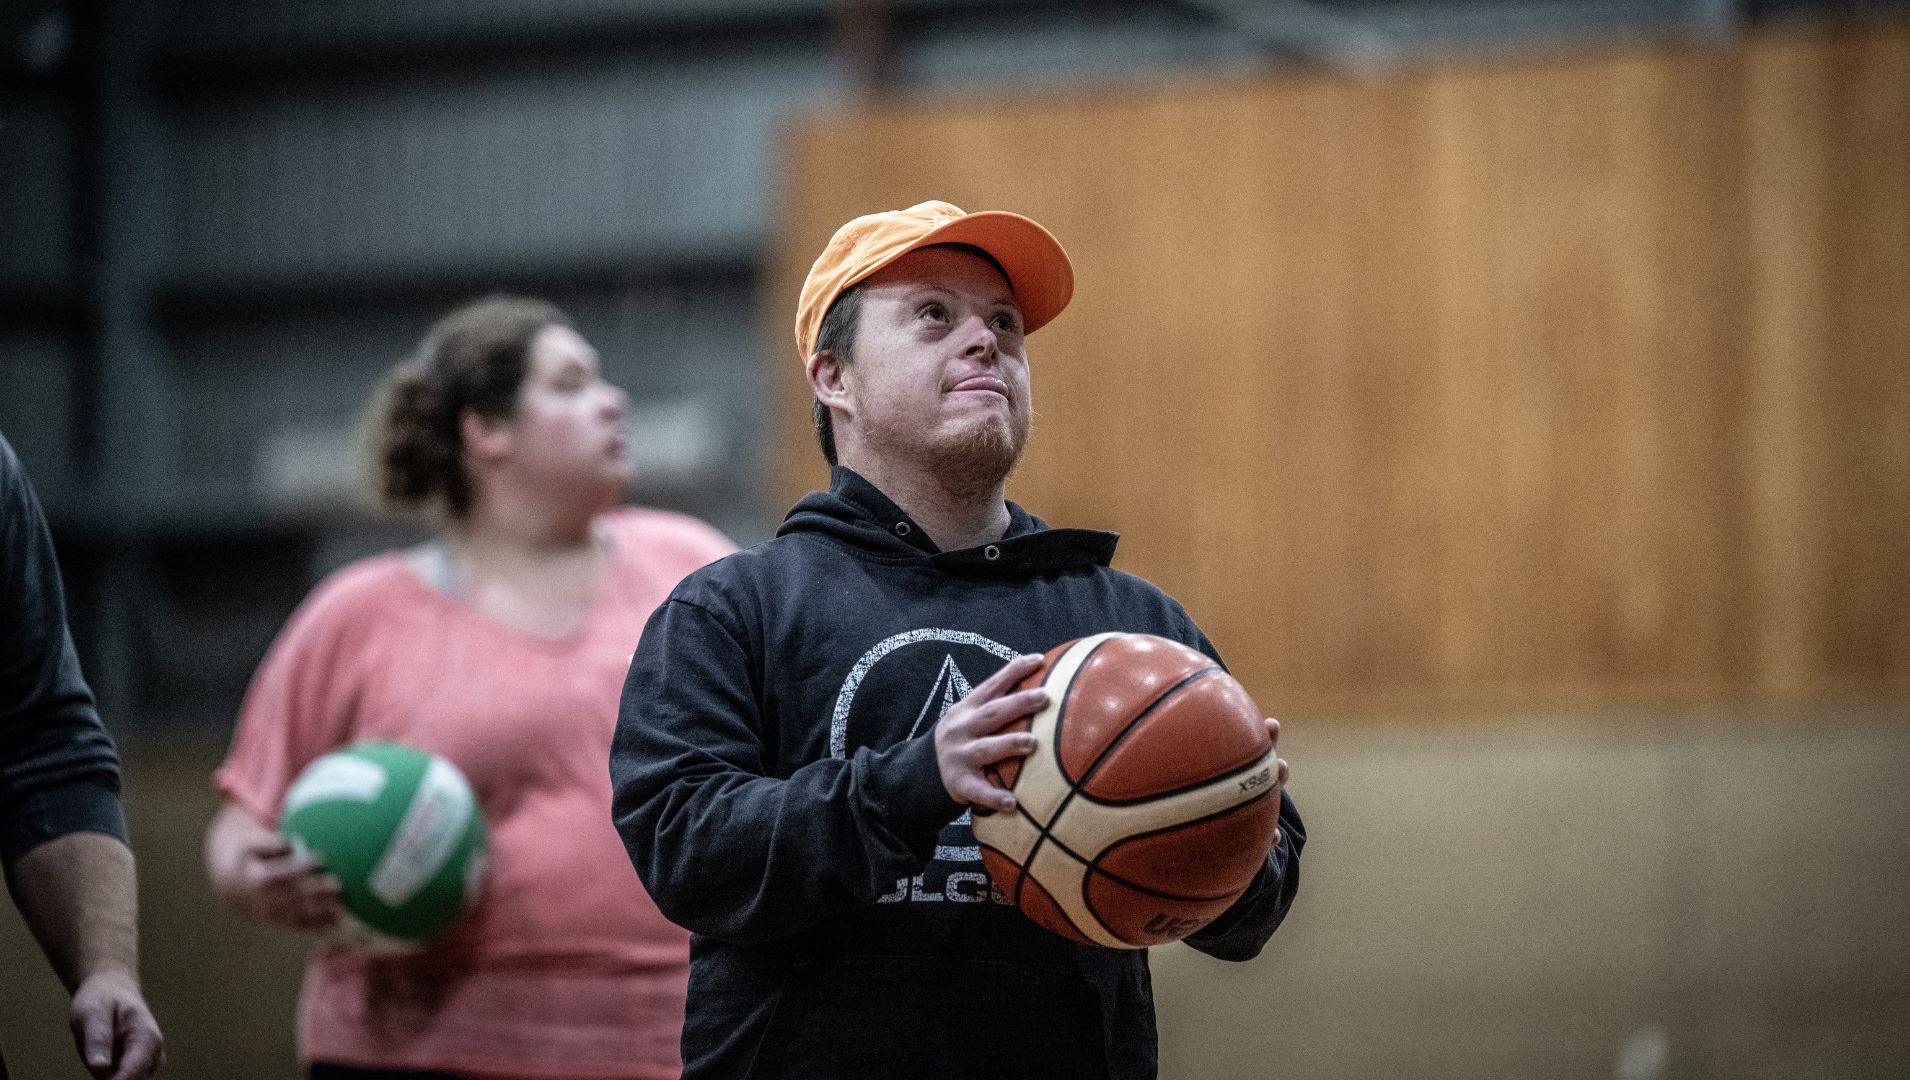 Basketball player prepares to shoot in the all abilities side